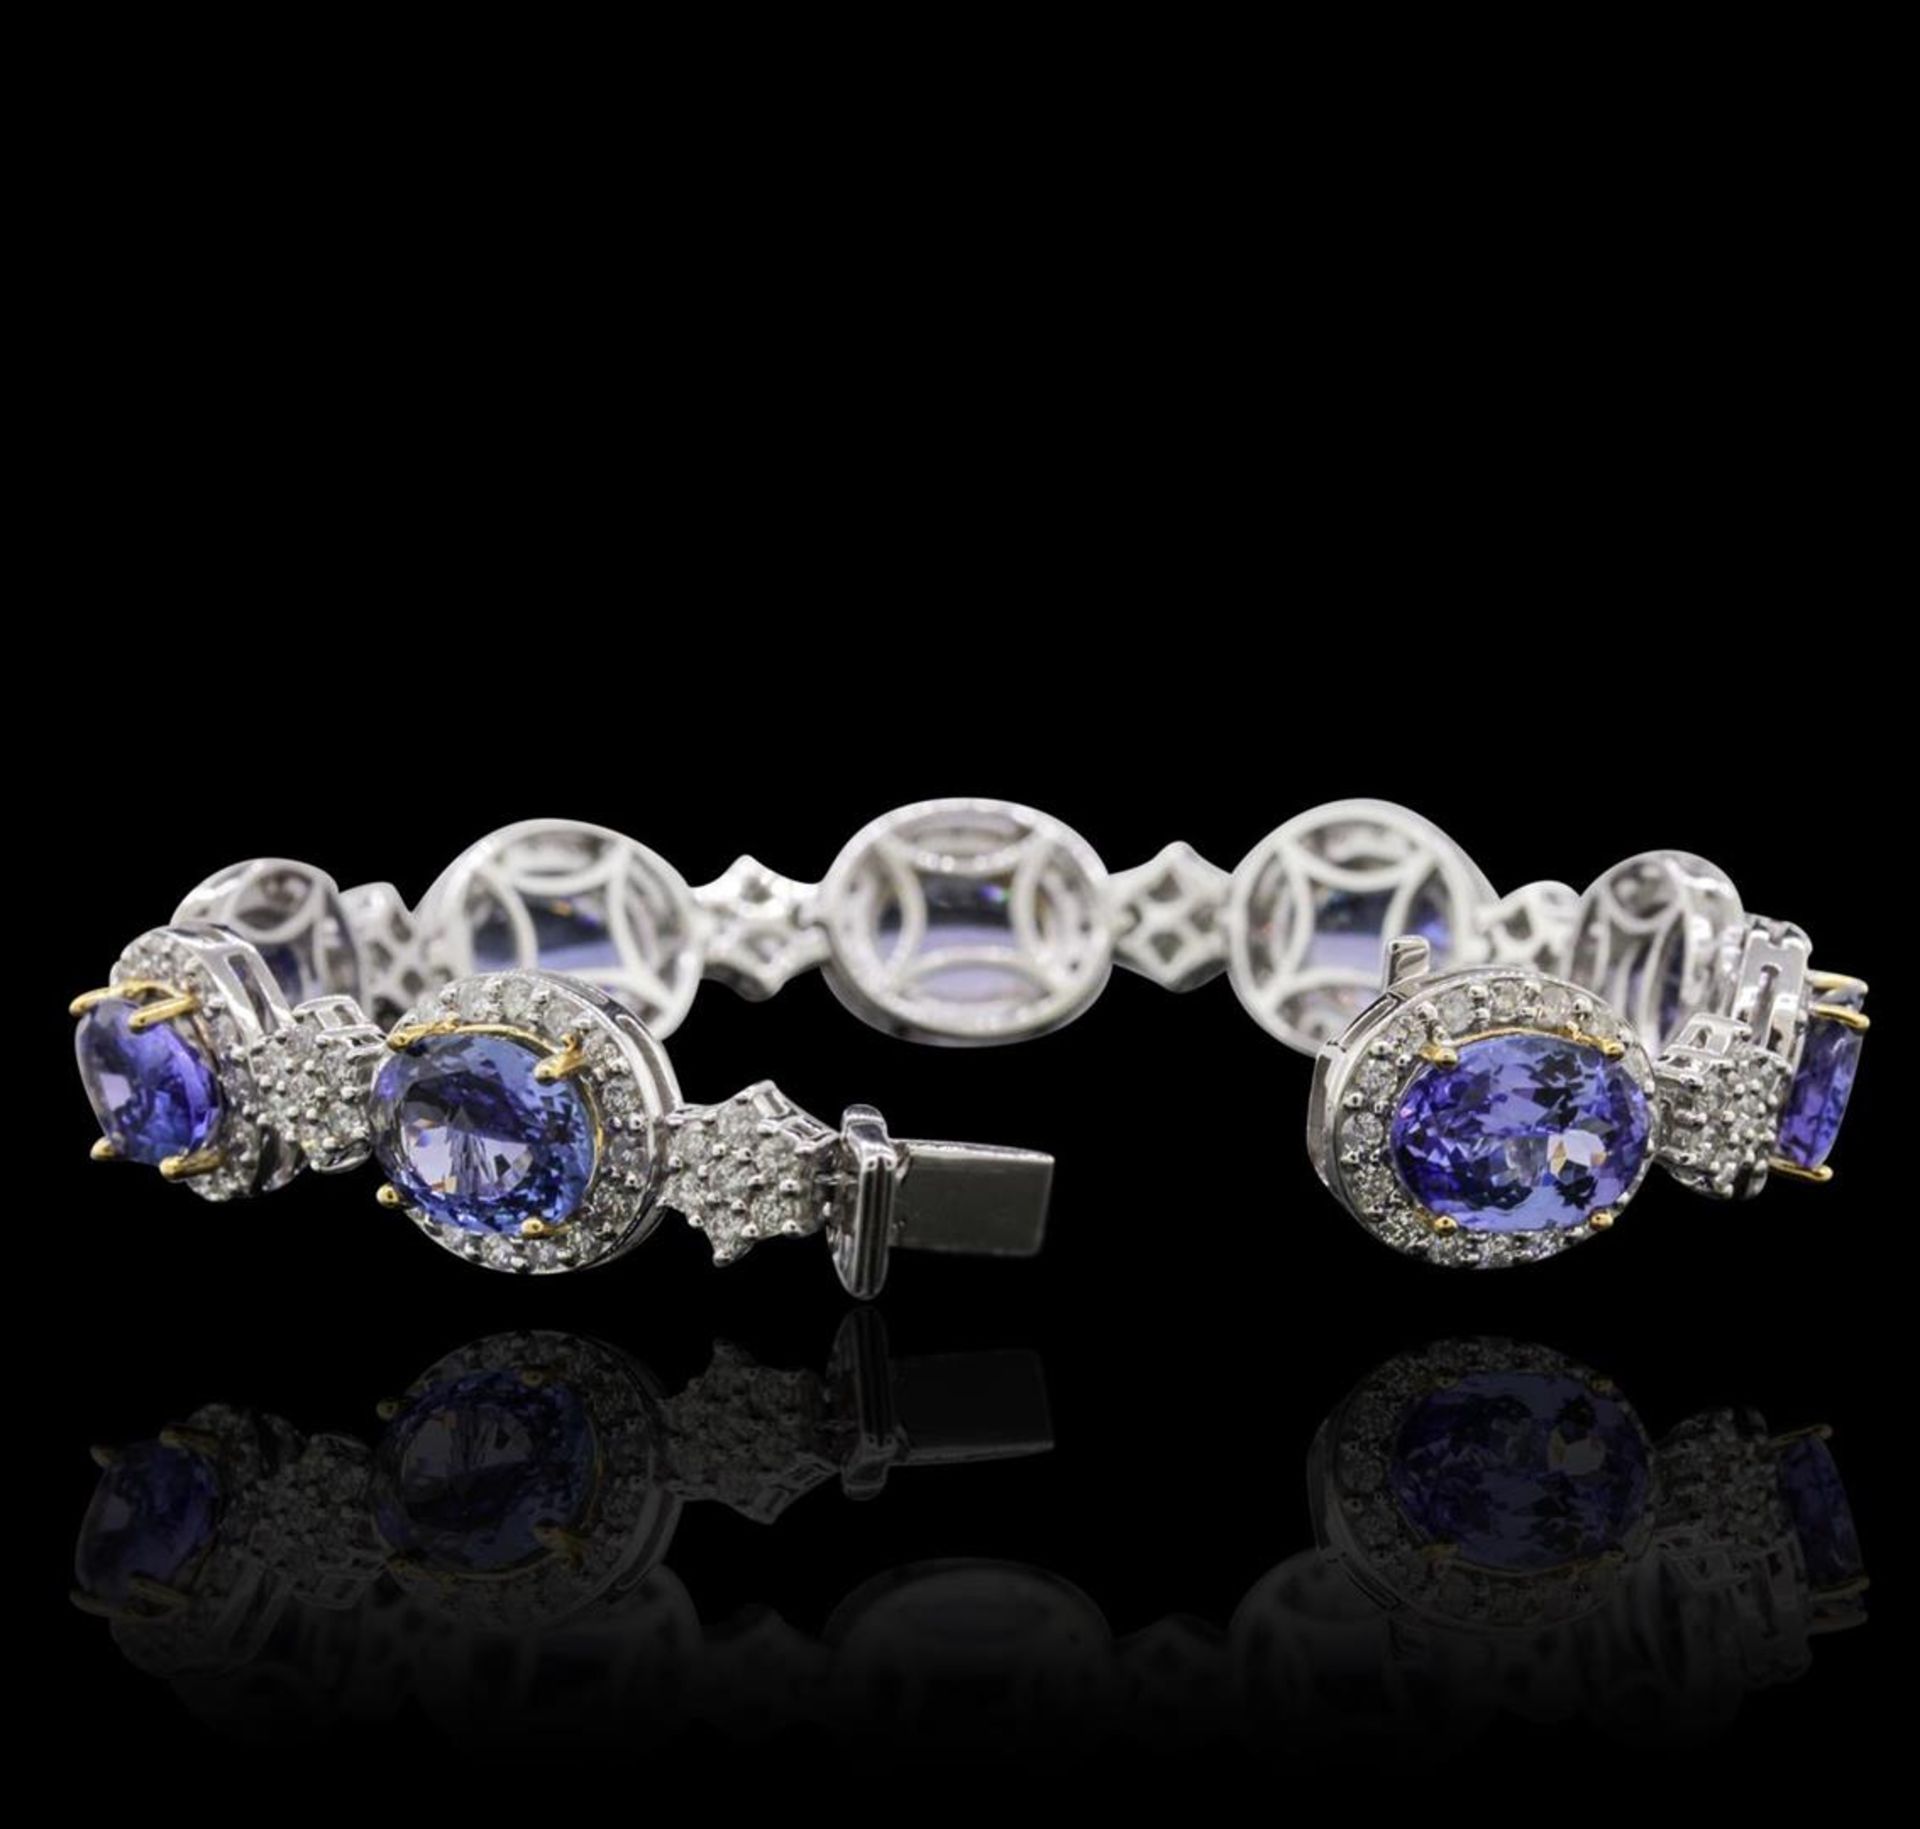 14KT Two-Tone Gold 25.74 ctw Tanzanite and Diamond Bracelet - Image 3 of 4